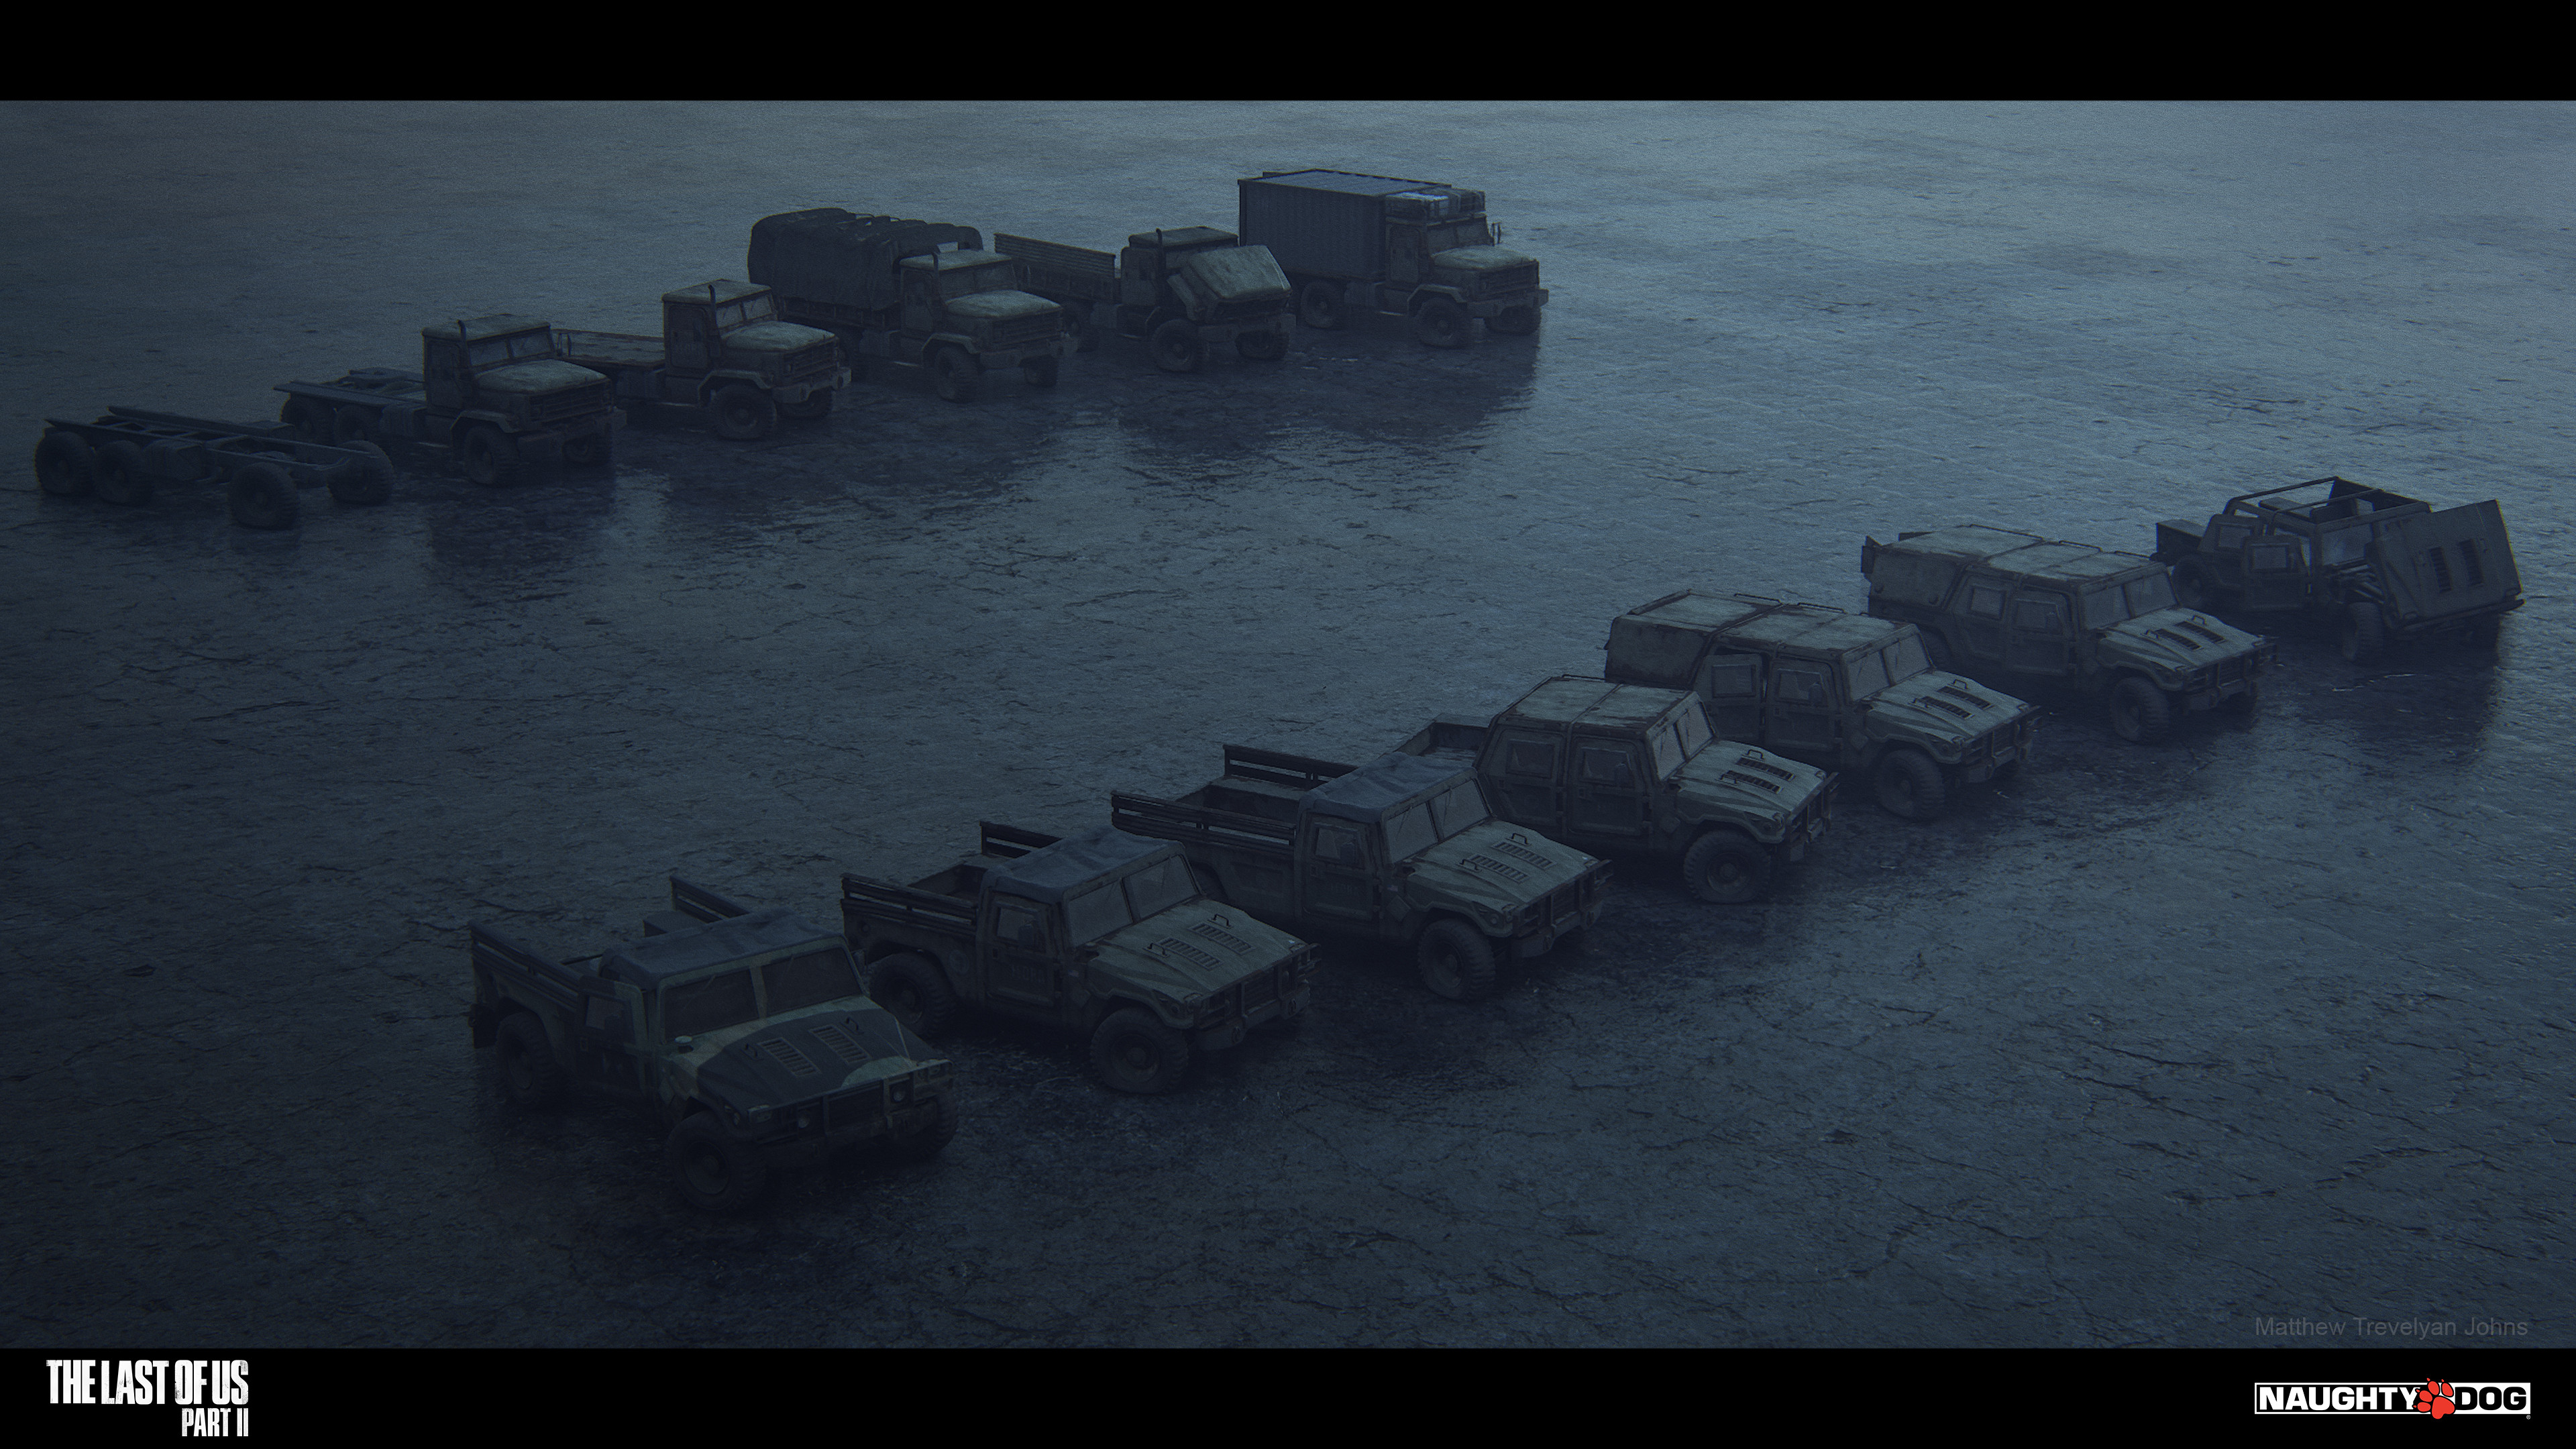 I designed these military vehicles to be completely modular, so that multiple variations could be made from a collection of re-usable parts. This meant many vehicles could exist in our levels, using our instancing system to save level memory